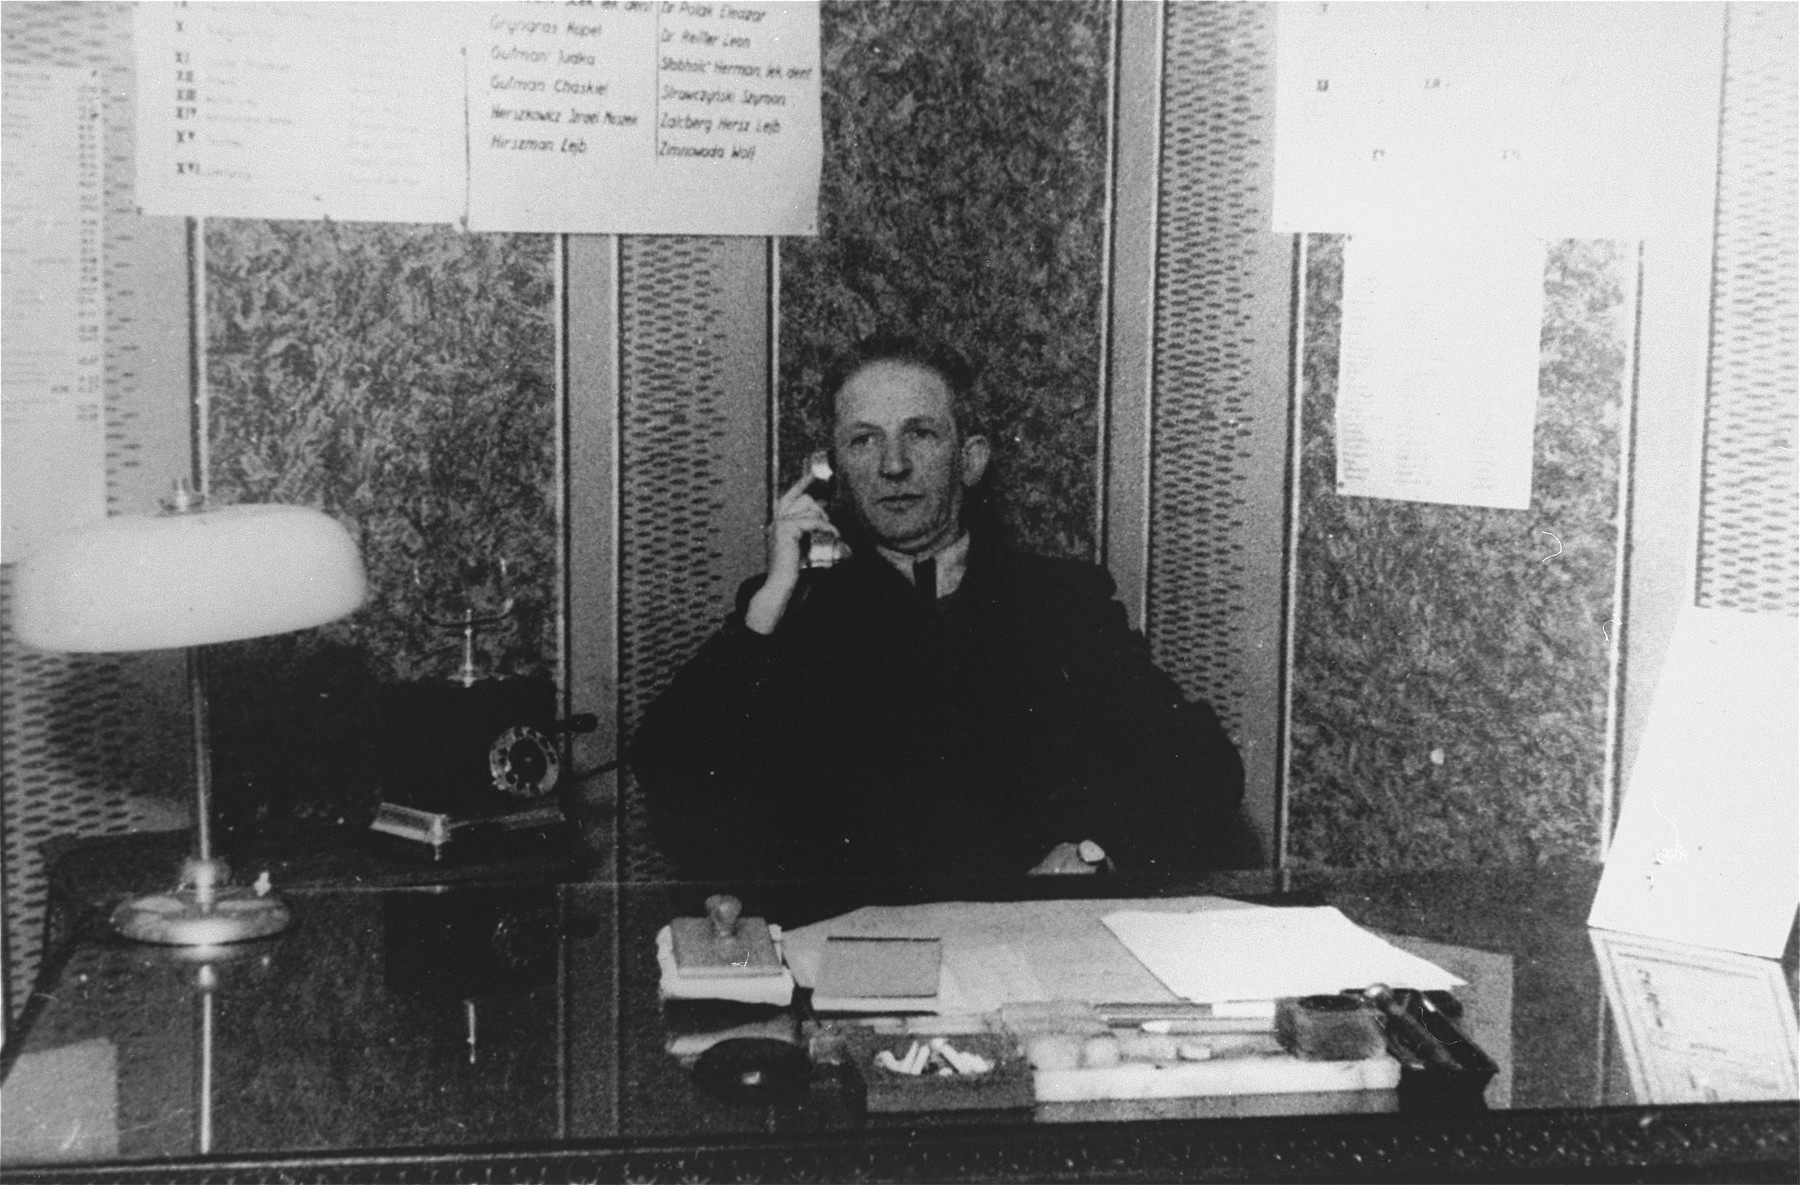 A member of the ghetto administration talks on the telephone while seated at his desk in the office of the Judenrat in the Kielce ghetto.

This photo was one the images included in an official album prepared by the Judenrat of the Kielce ghetto in 1942.